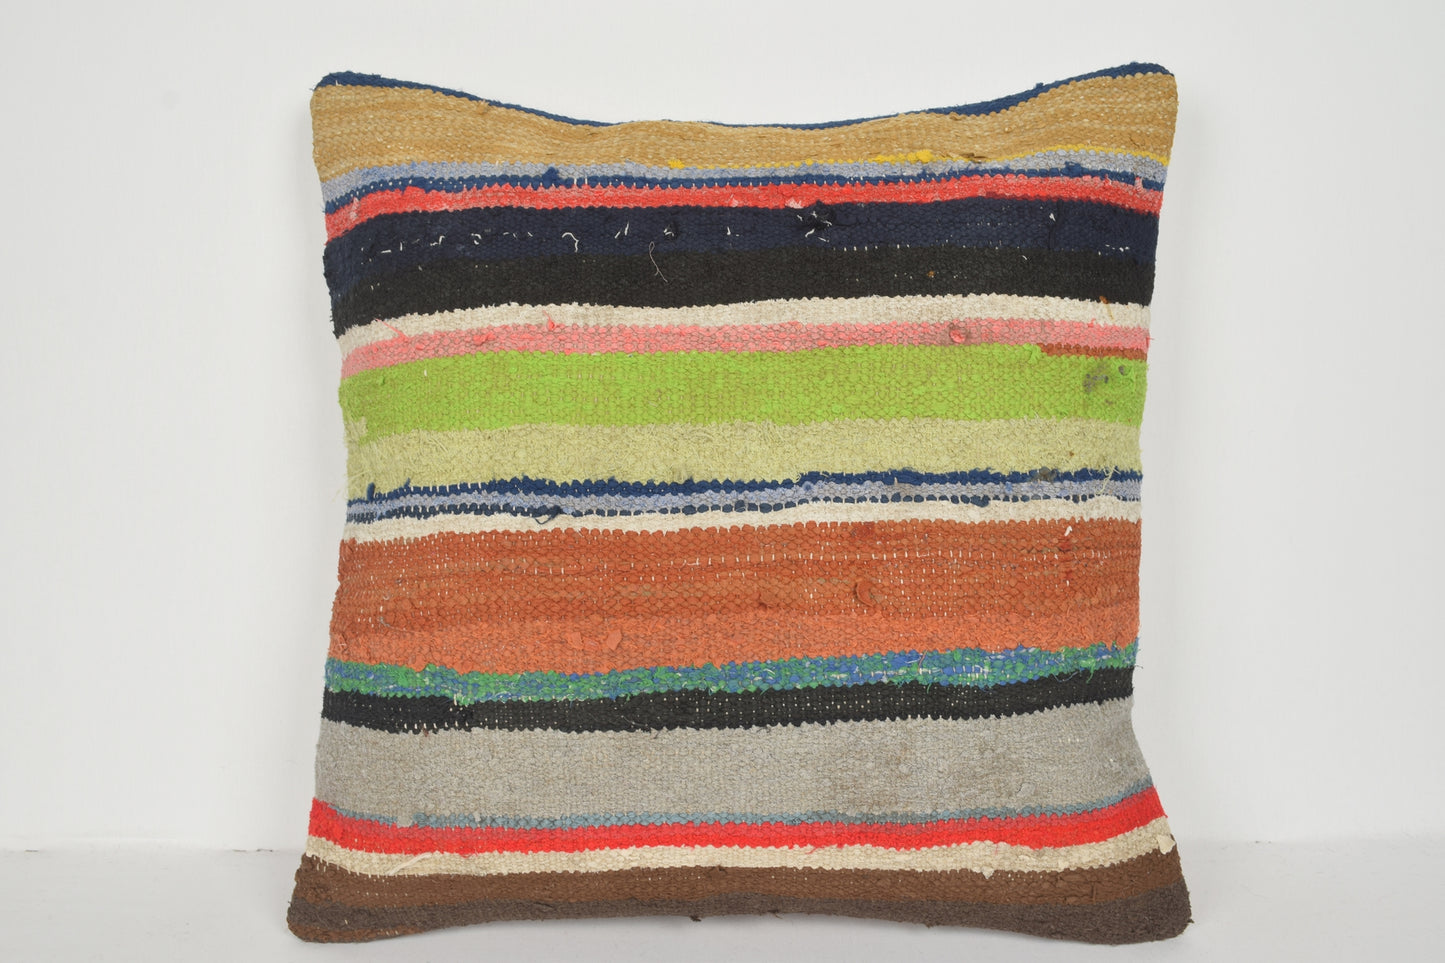 Turkish Corner Pillow Pattern A00764 Tuscan cushions Moroccan pillow covers 24x24